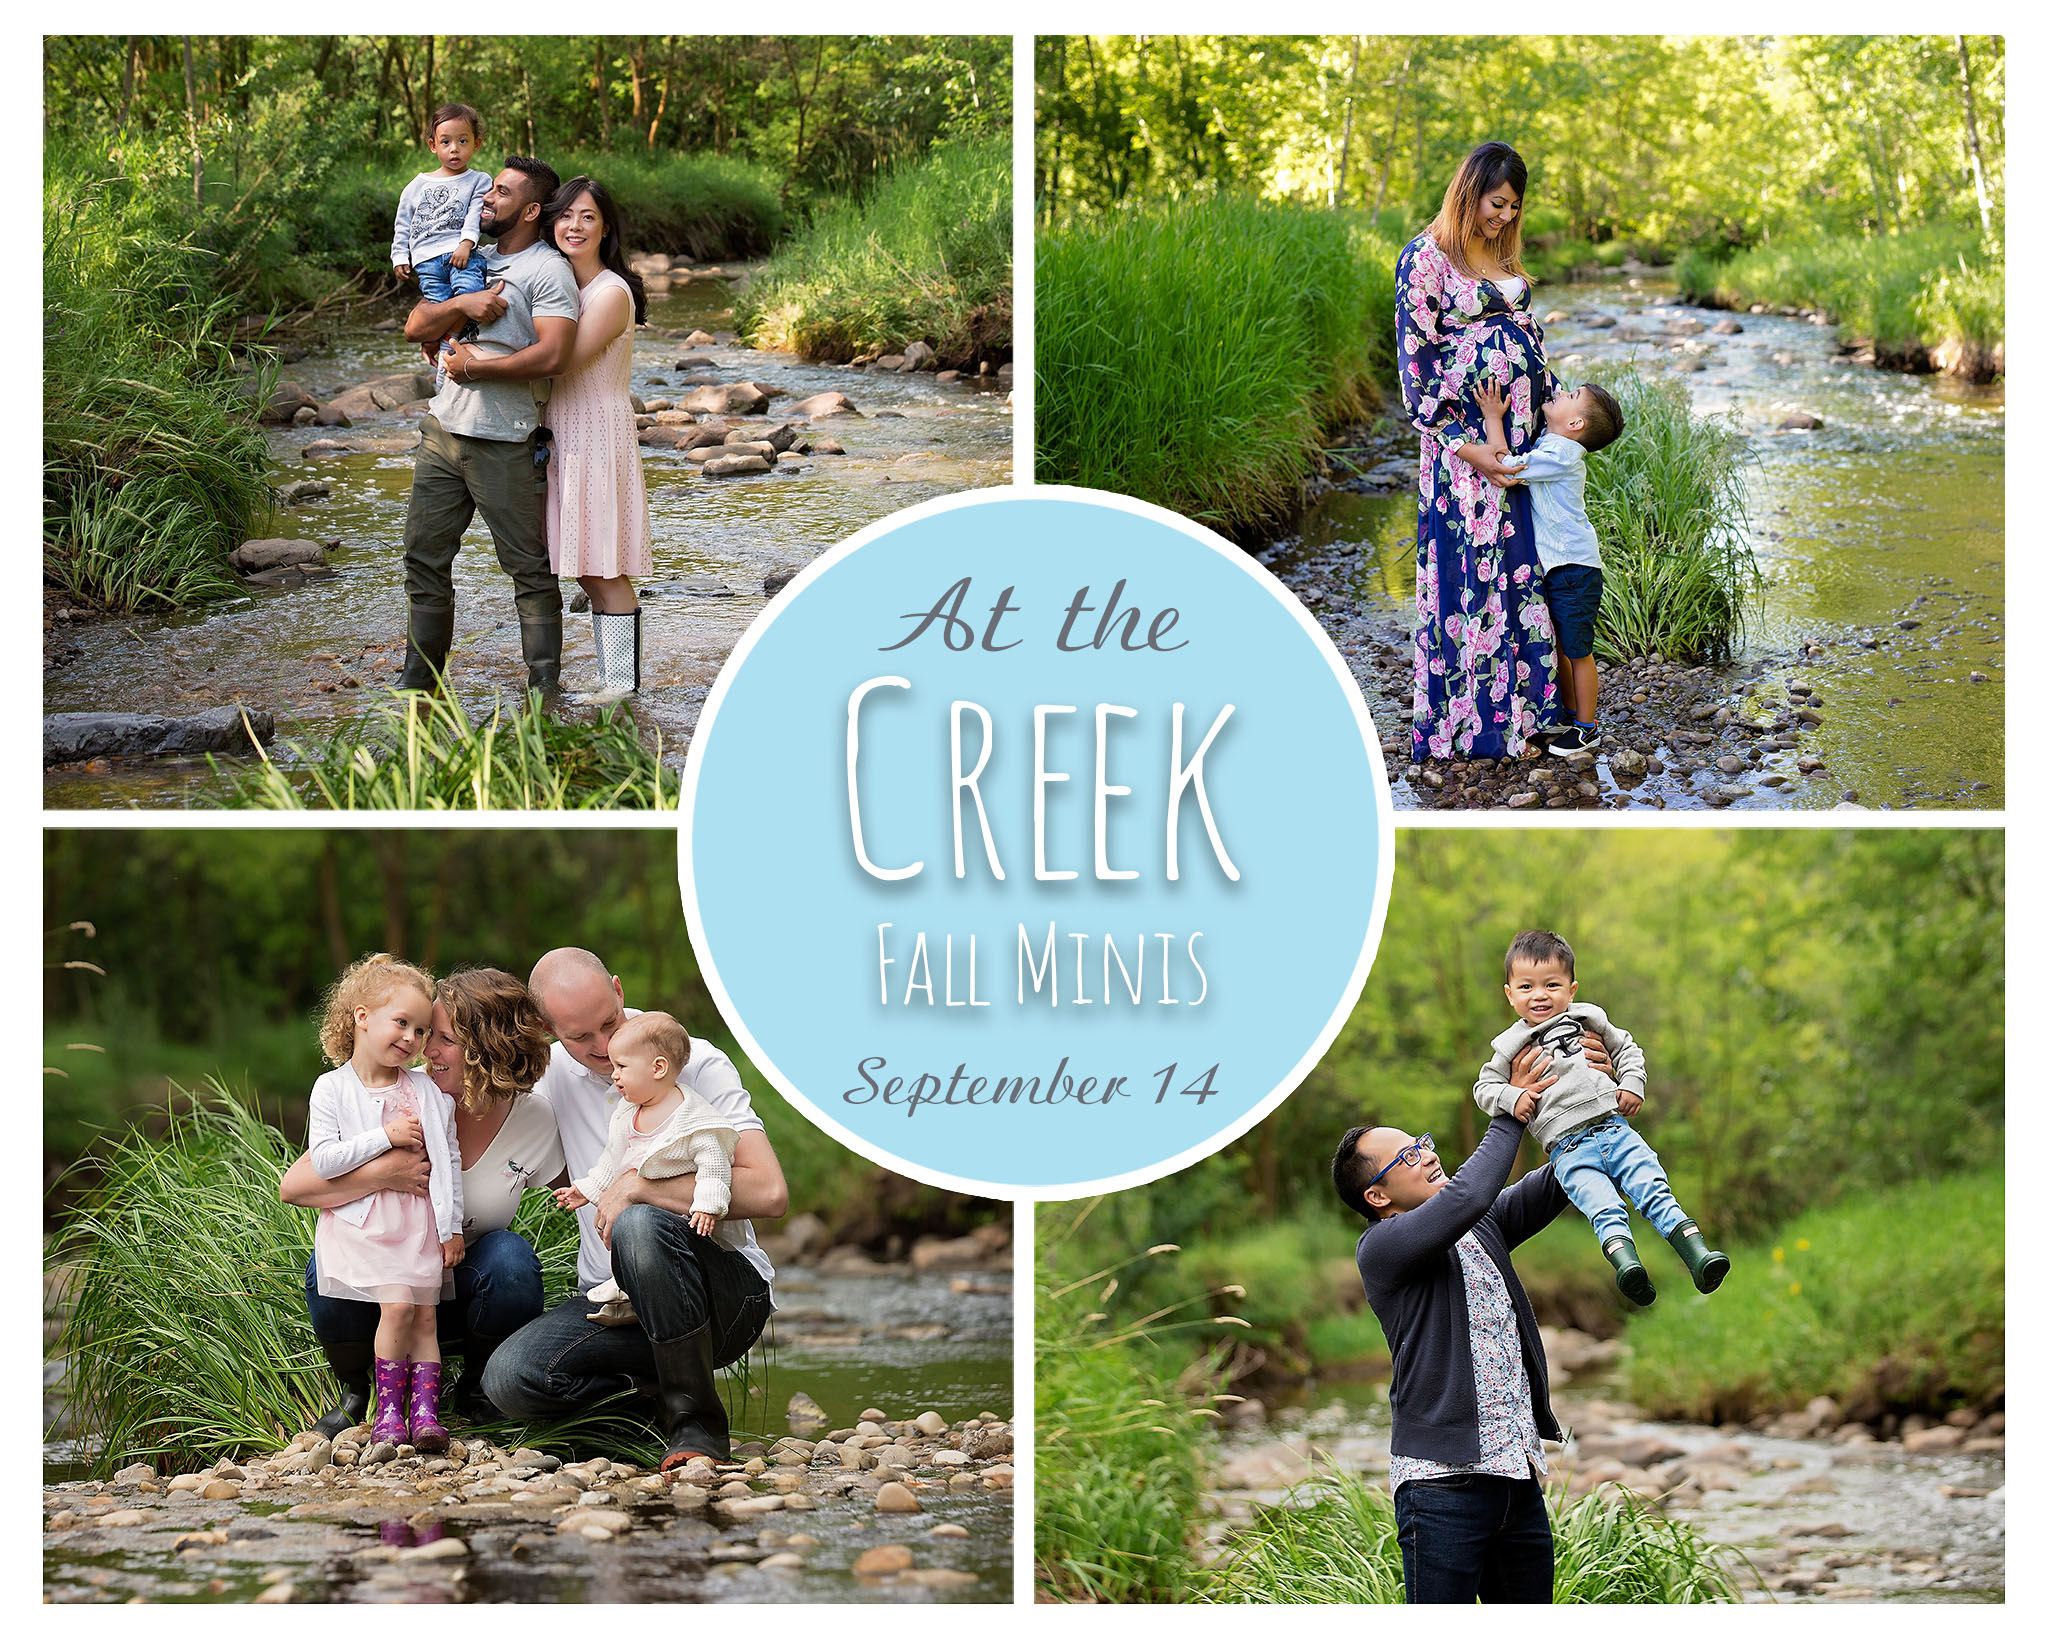 Families in Edmonton pose together in a stream in the Millcreek Ravine.